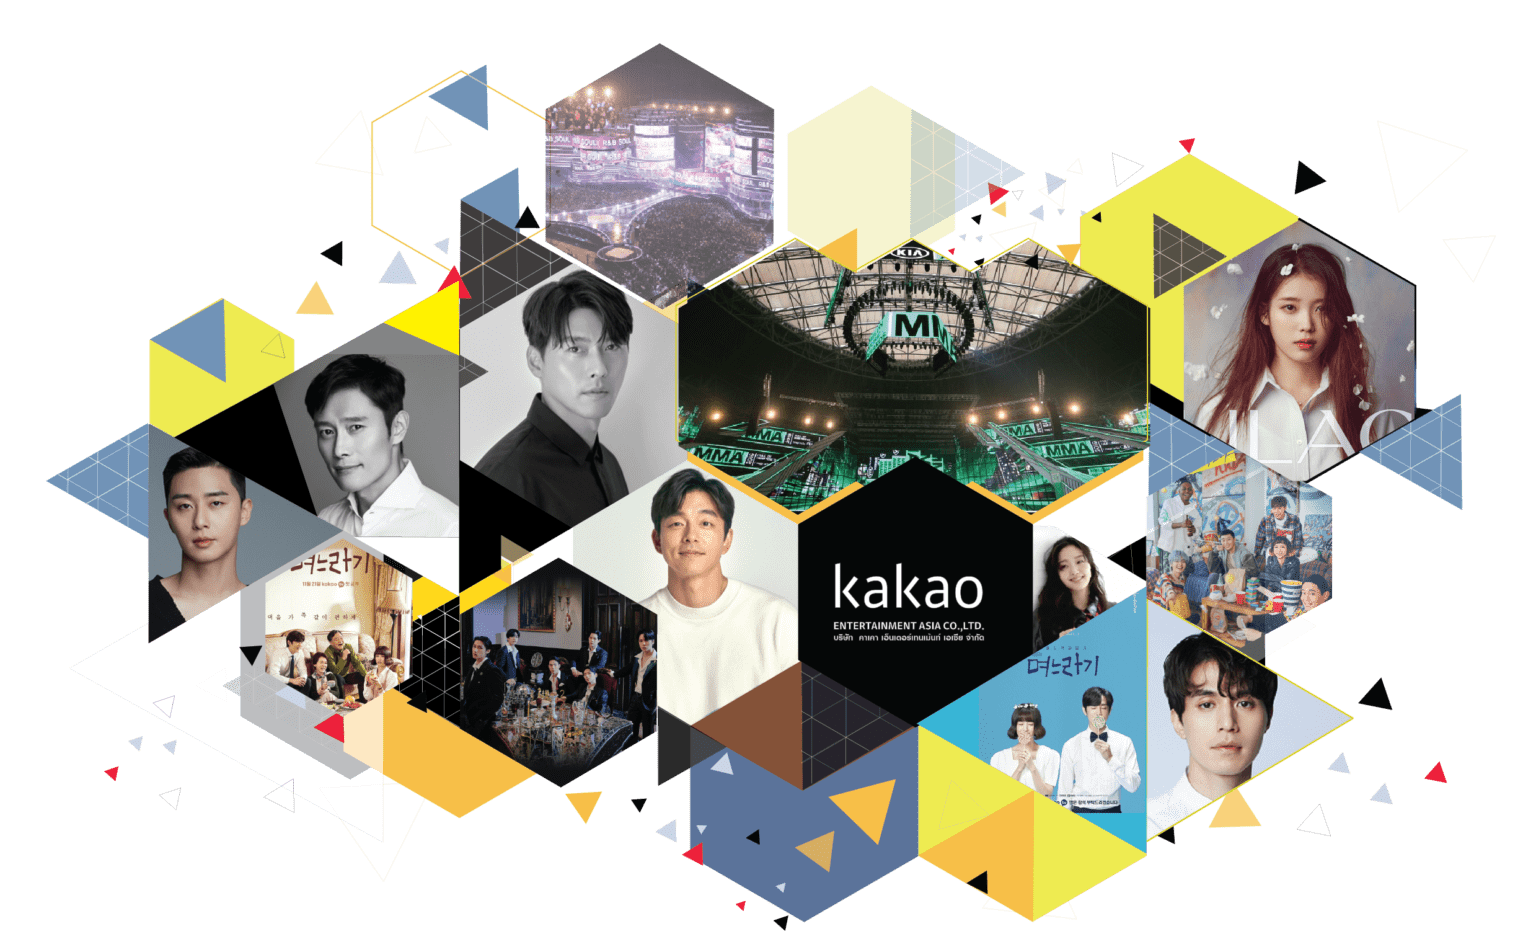 S Korea's Kakao Entertainment secures $966m from sovereign wealth funds